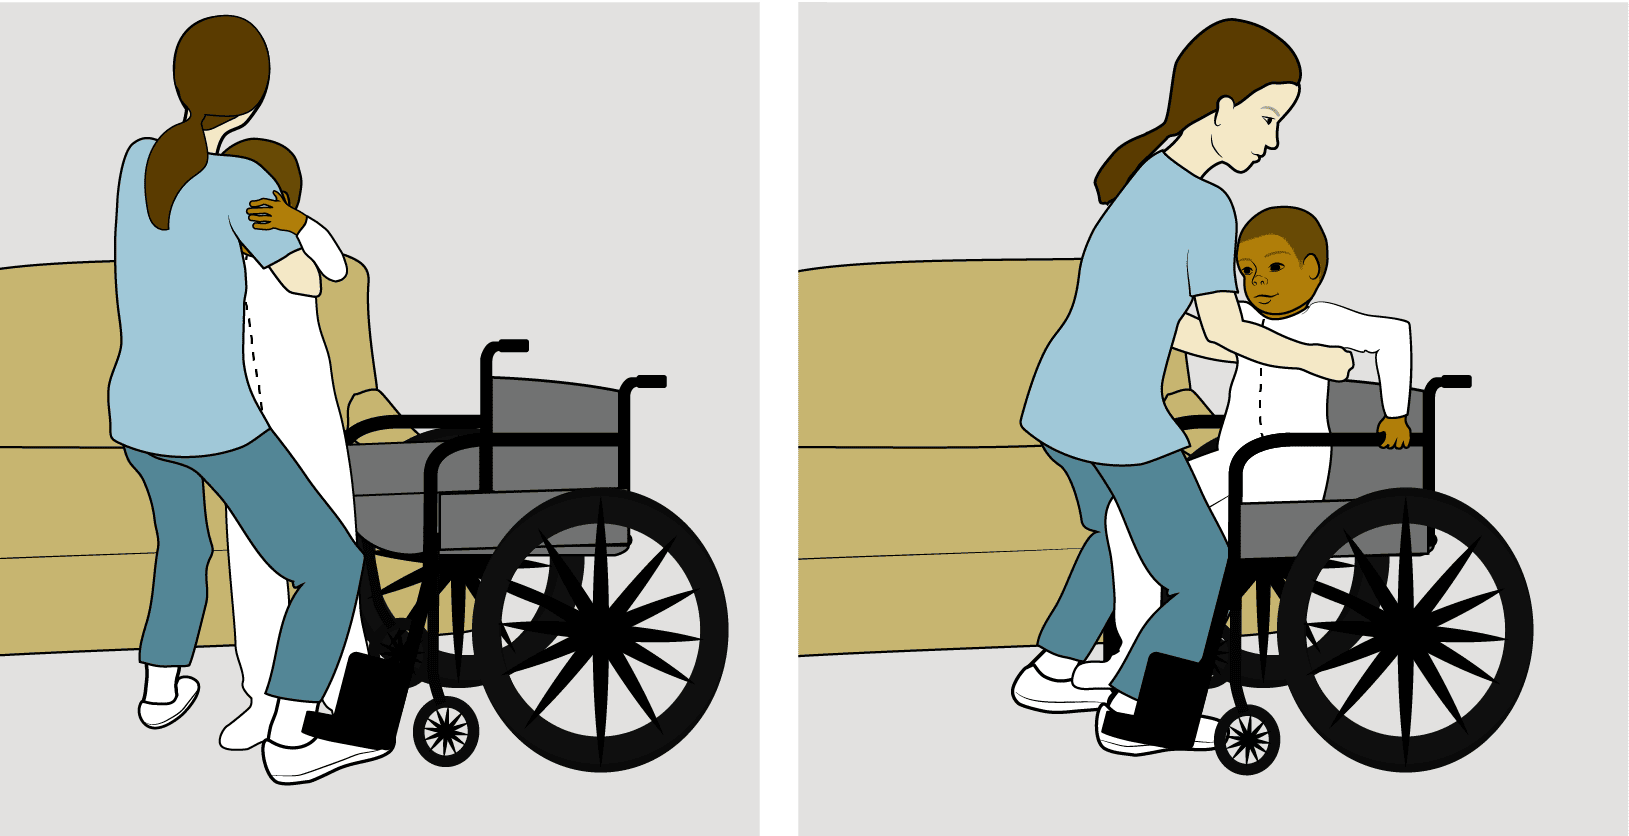 Lowering patient into wheelchair